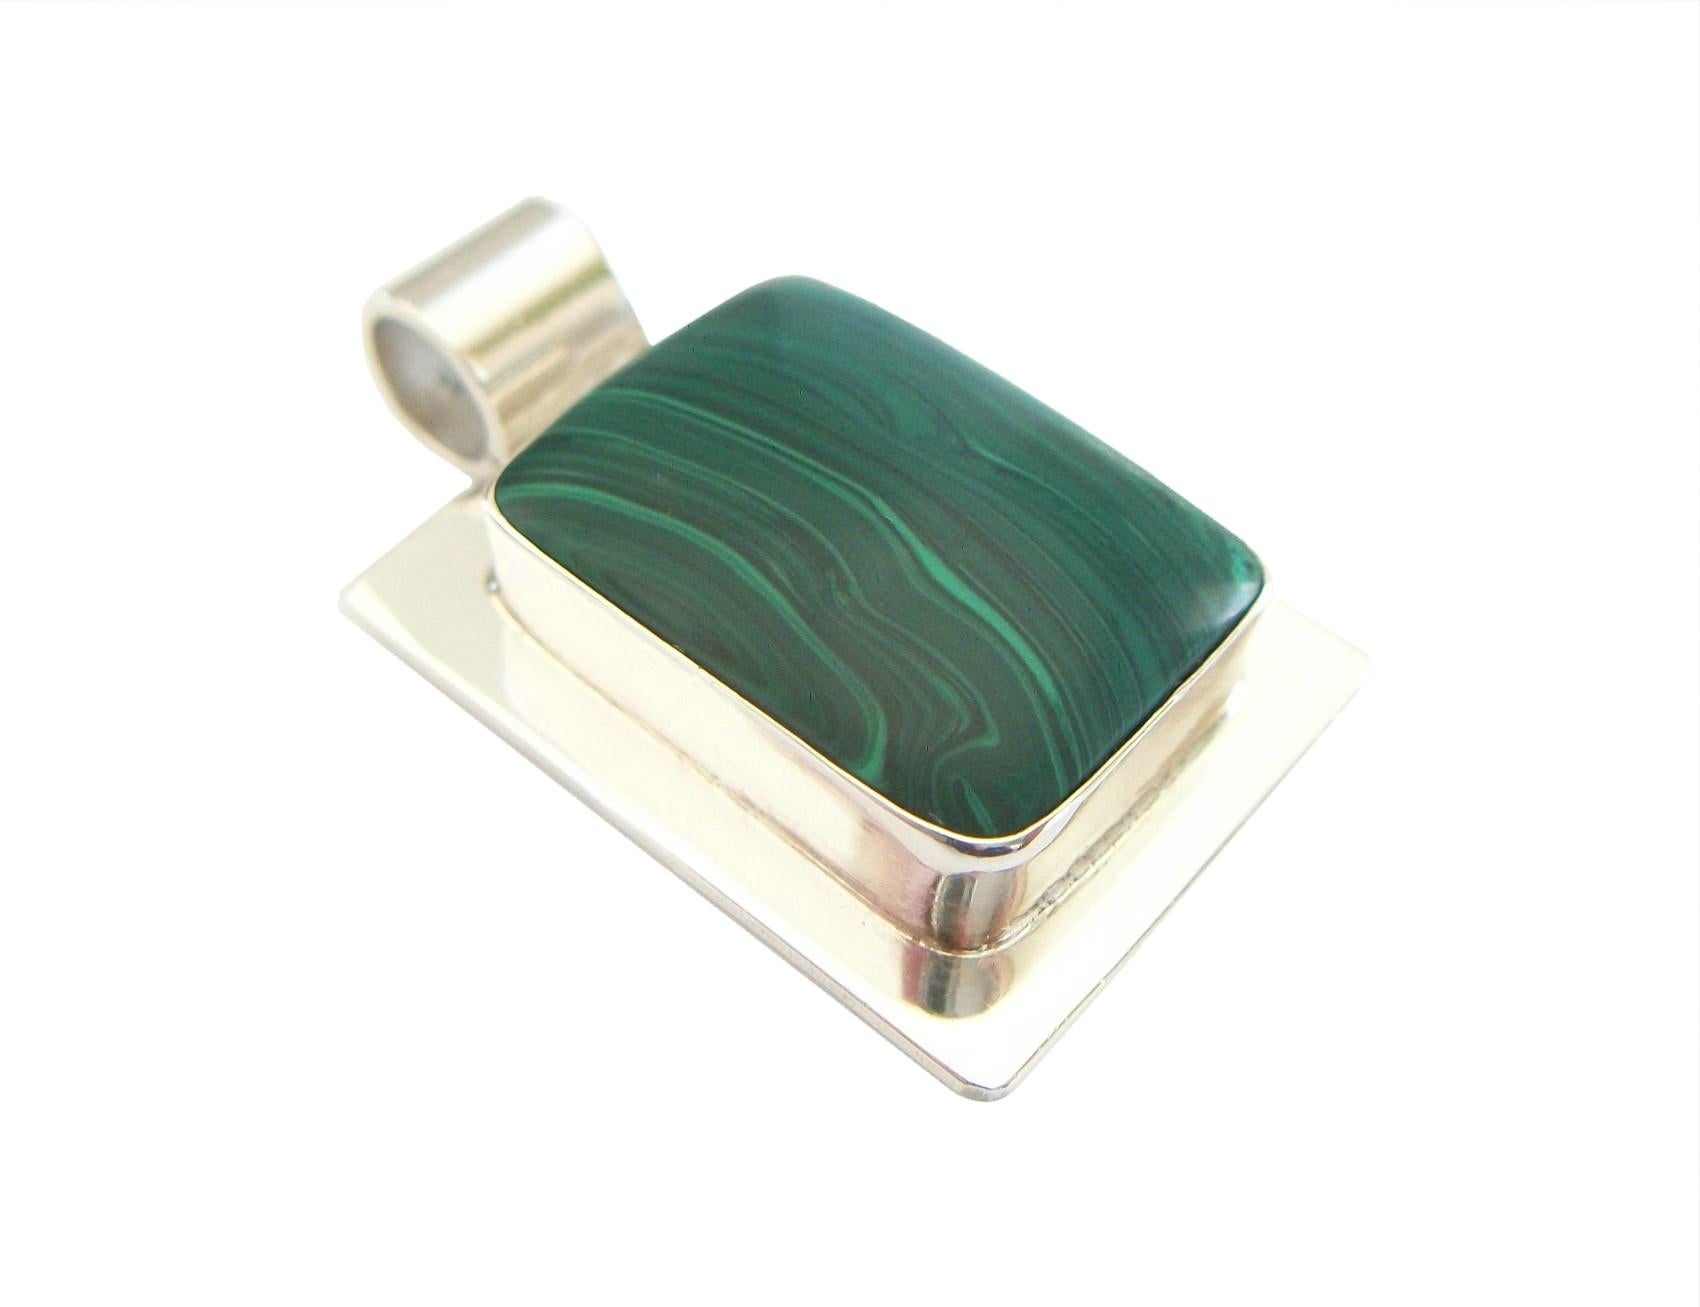 Modernist Malachite and sterling silver unisex pendant - featuring a large polished bezel set cabochon Malachite gemstone (approximately 30 carats - 28.0 x 20.0 x 5.0 mm.) - large bale (7.0 mm. diameter - fits a large cord or chain) - no chain -